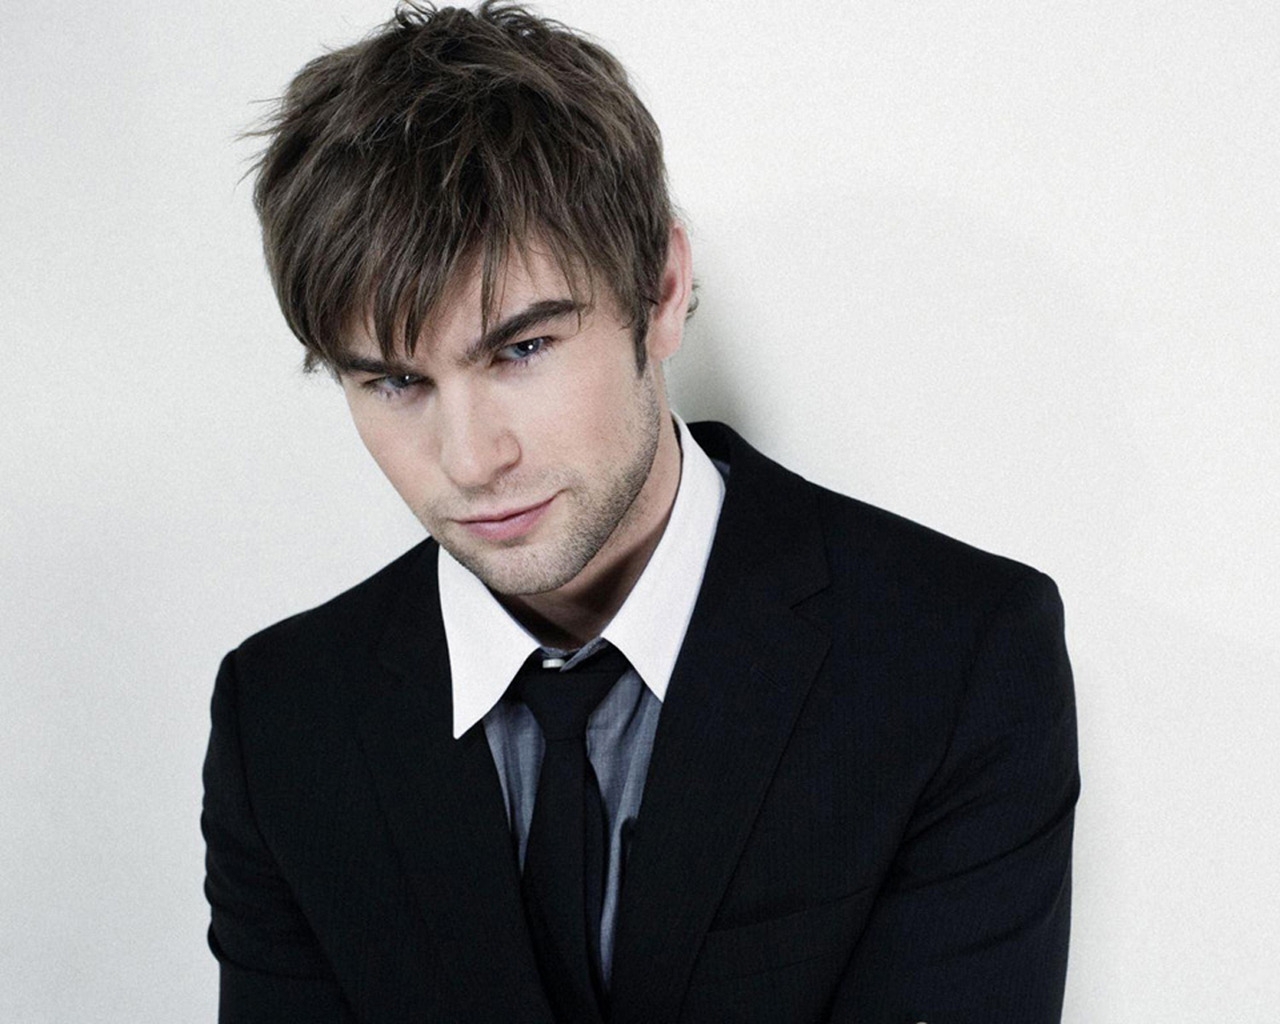 Chace Crawford for 1280 x 1024 resolution